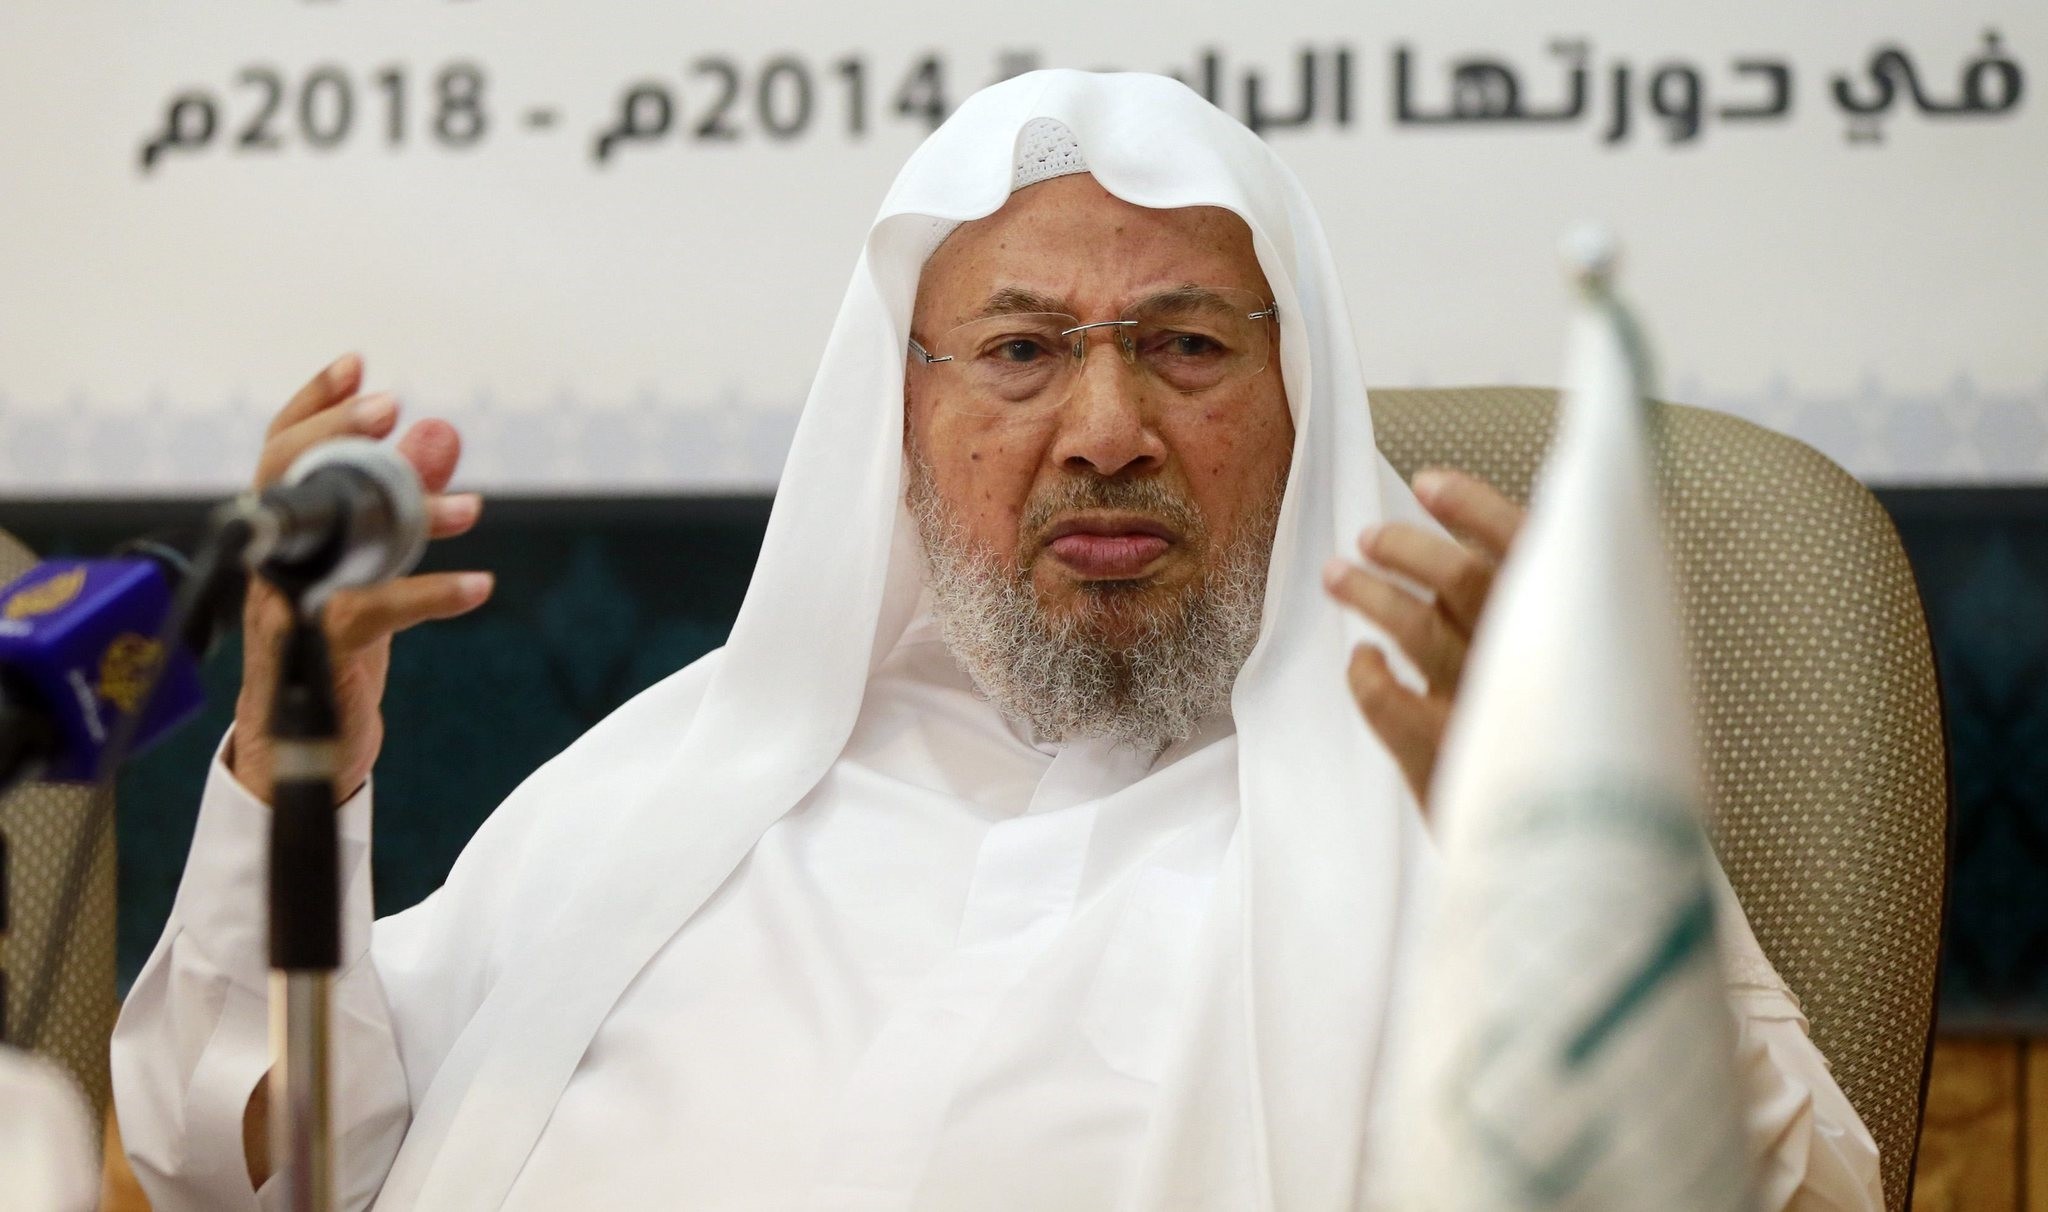 Chairman of the International Union of Muslim Scholars Youssef al-Qaradawi (R) speaks during a news conference in Doha June 23, 2014. (REUTERS Photo) 